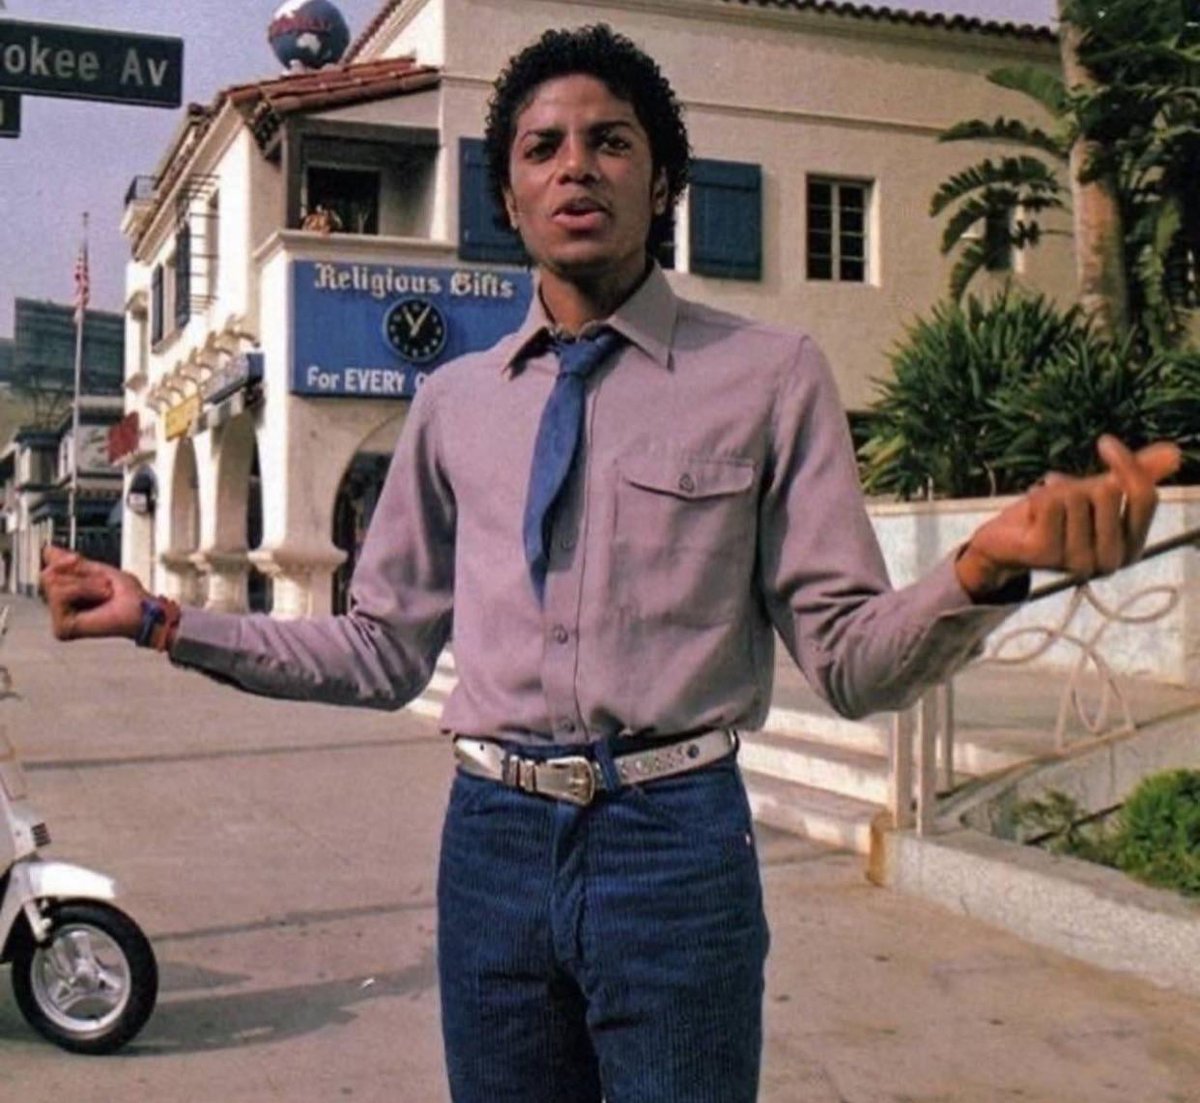 He looks like a salesman you would buy a house from just because of how charming he looks. 

#MichaelJackson